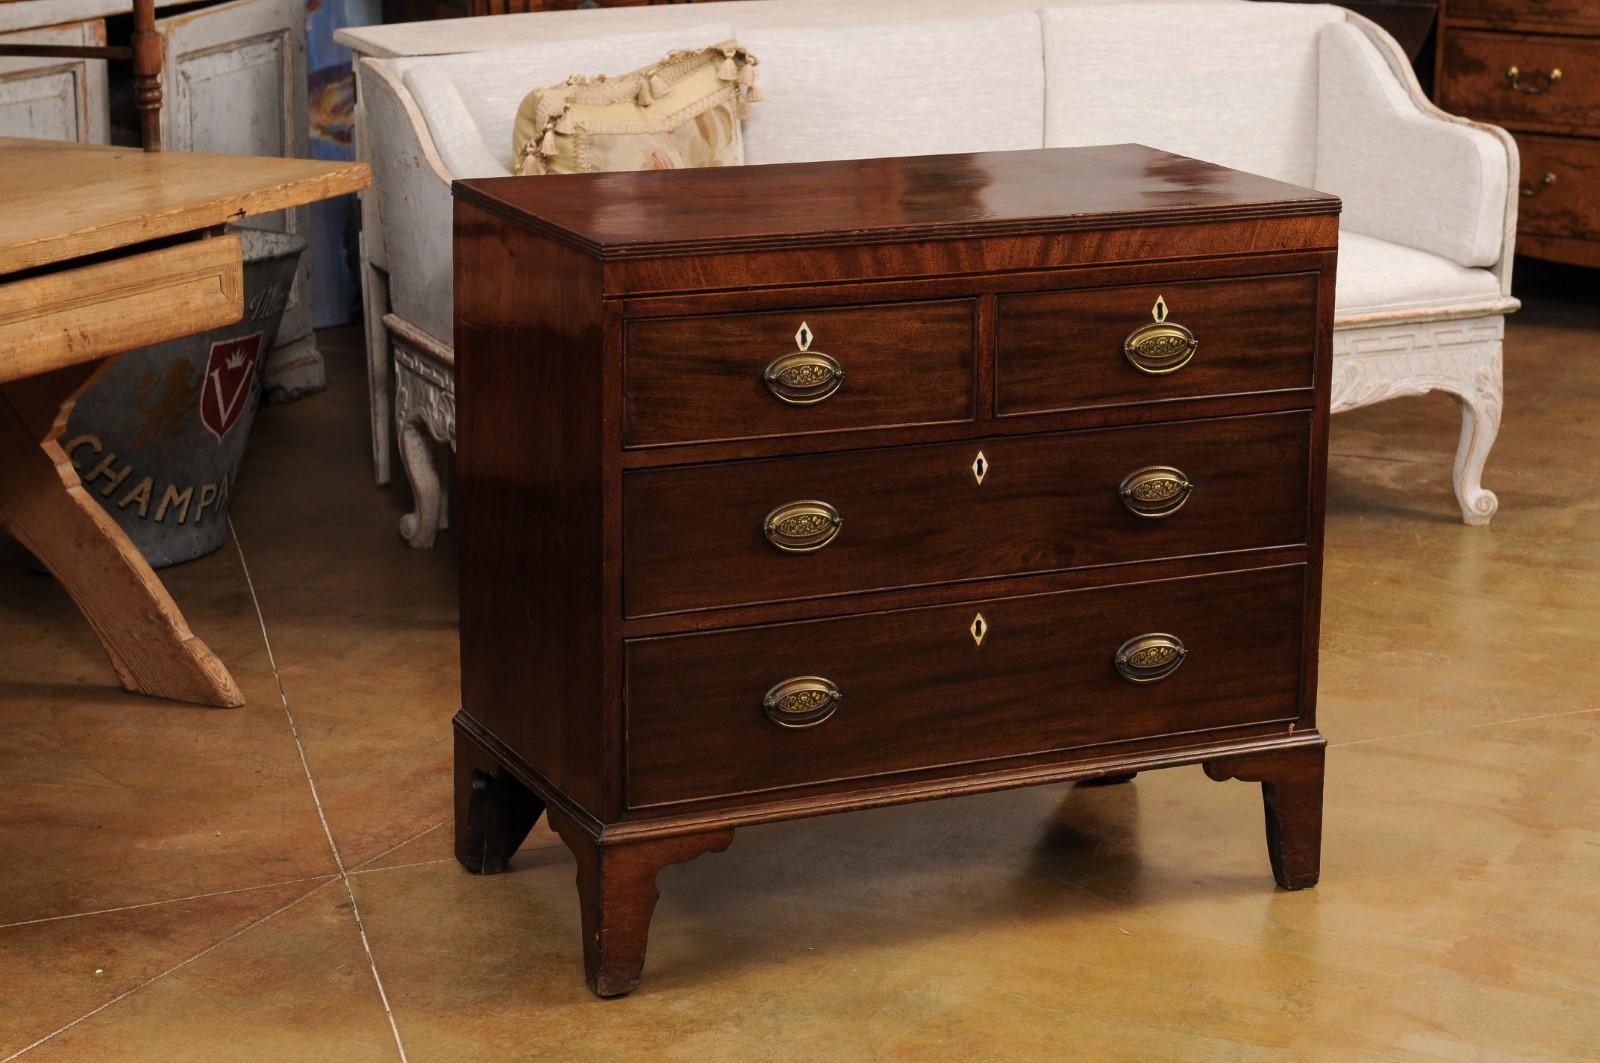 Inlay English Georgian Style Walnut Four-Drawer Chest with Sheraton Style Hardware For Sale